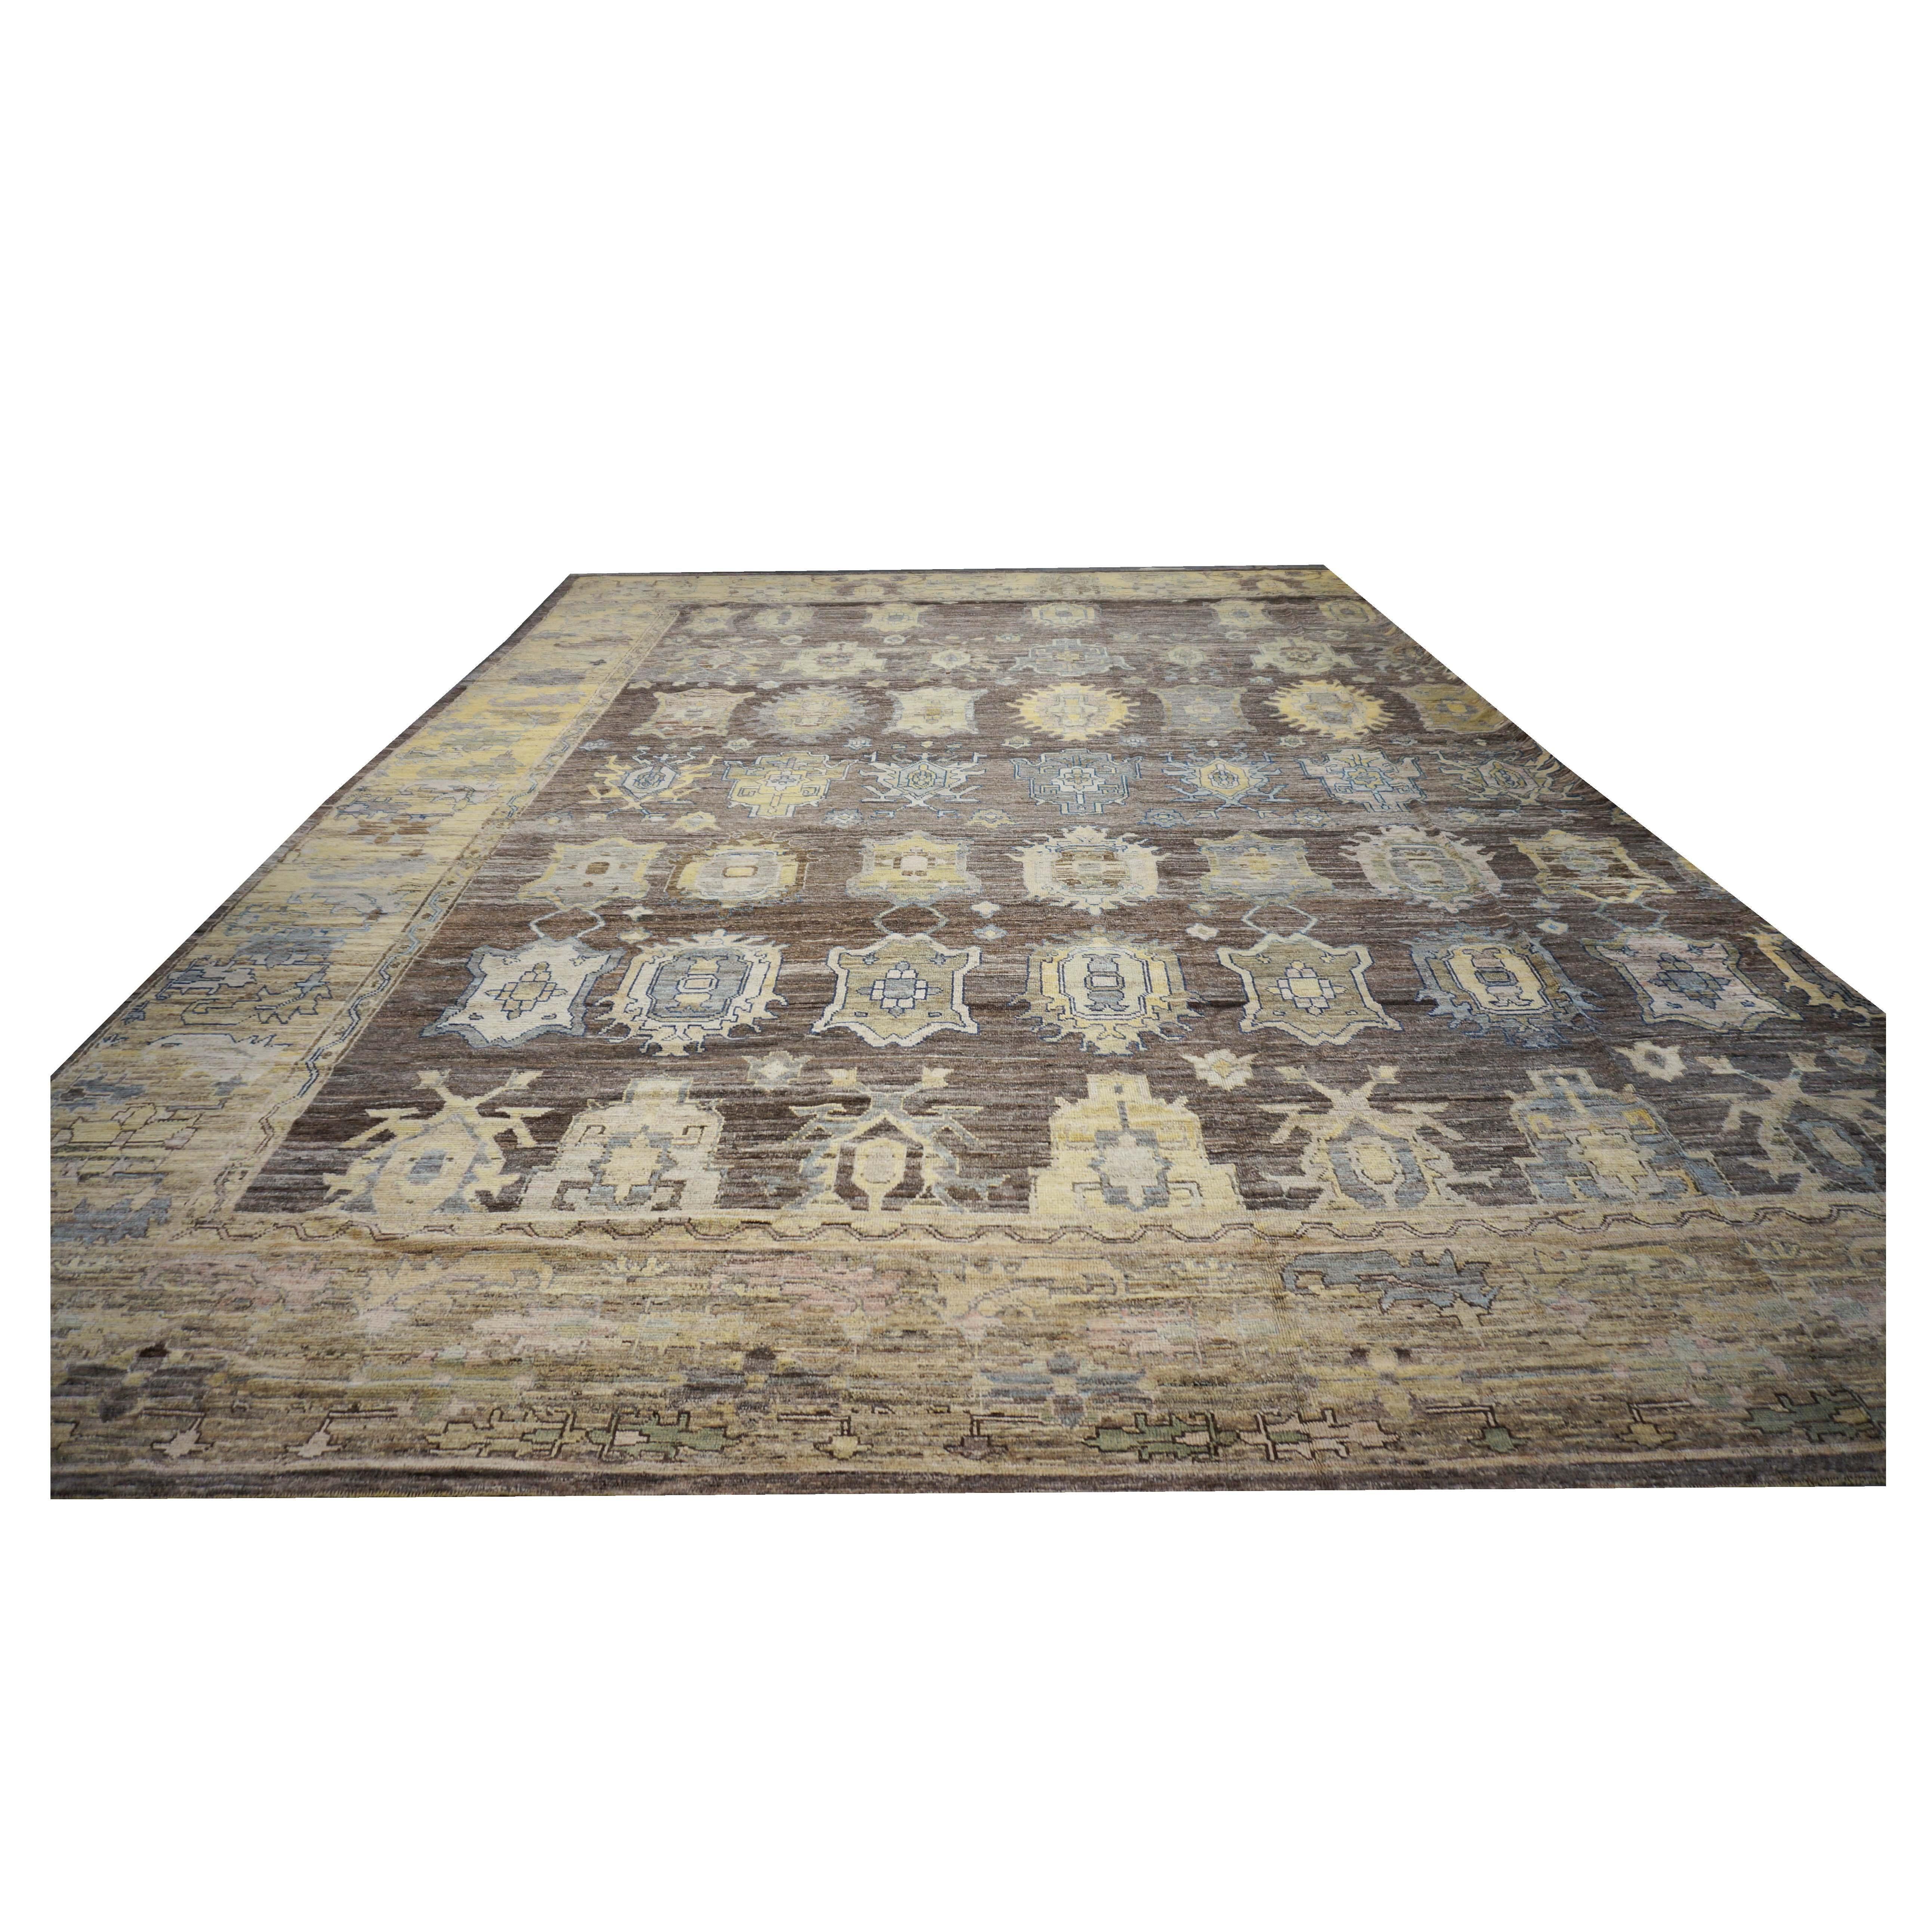 Ashly Fine rugs presents a 21st-century Turkish Oushak 19x20. Oushak weavings began in a location just south of Istanbul, in a region that was to become the rugs namesake, Oushak. Although nomads first produced the rugs for personal use only, since